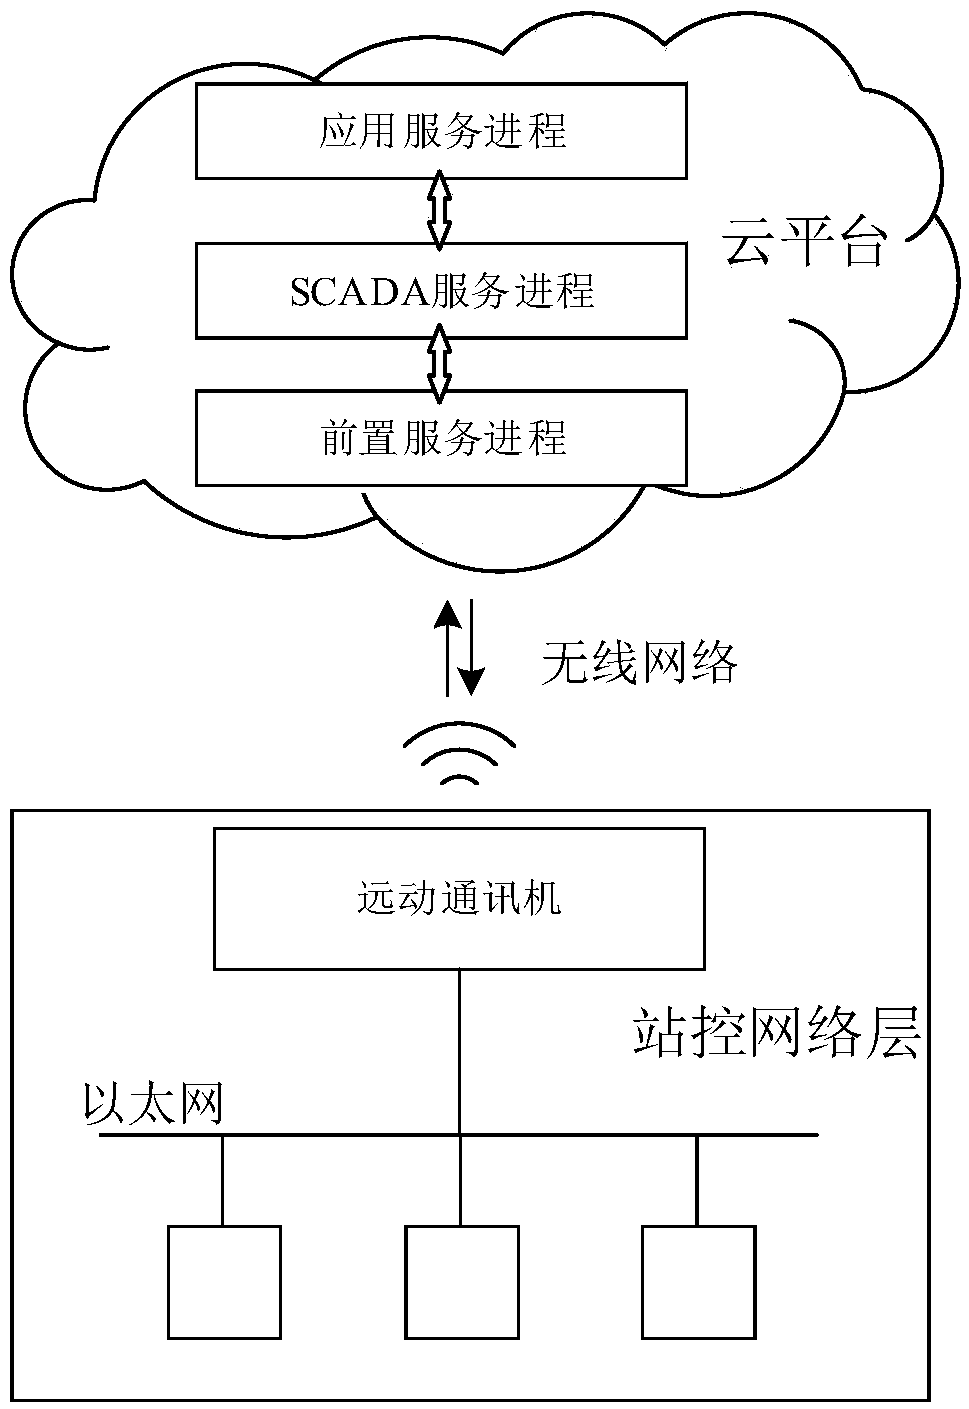 New energy power station operation control method based on cloud monitoring and data encryption transmission